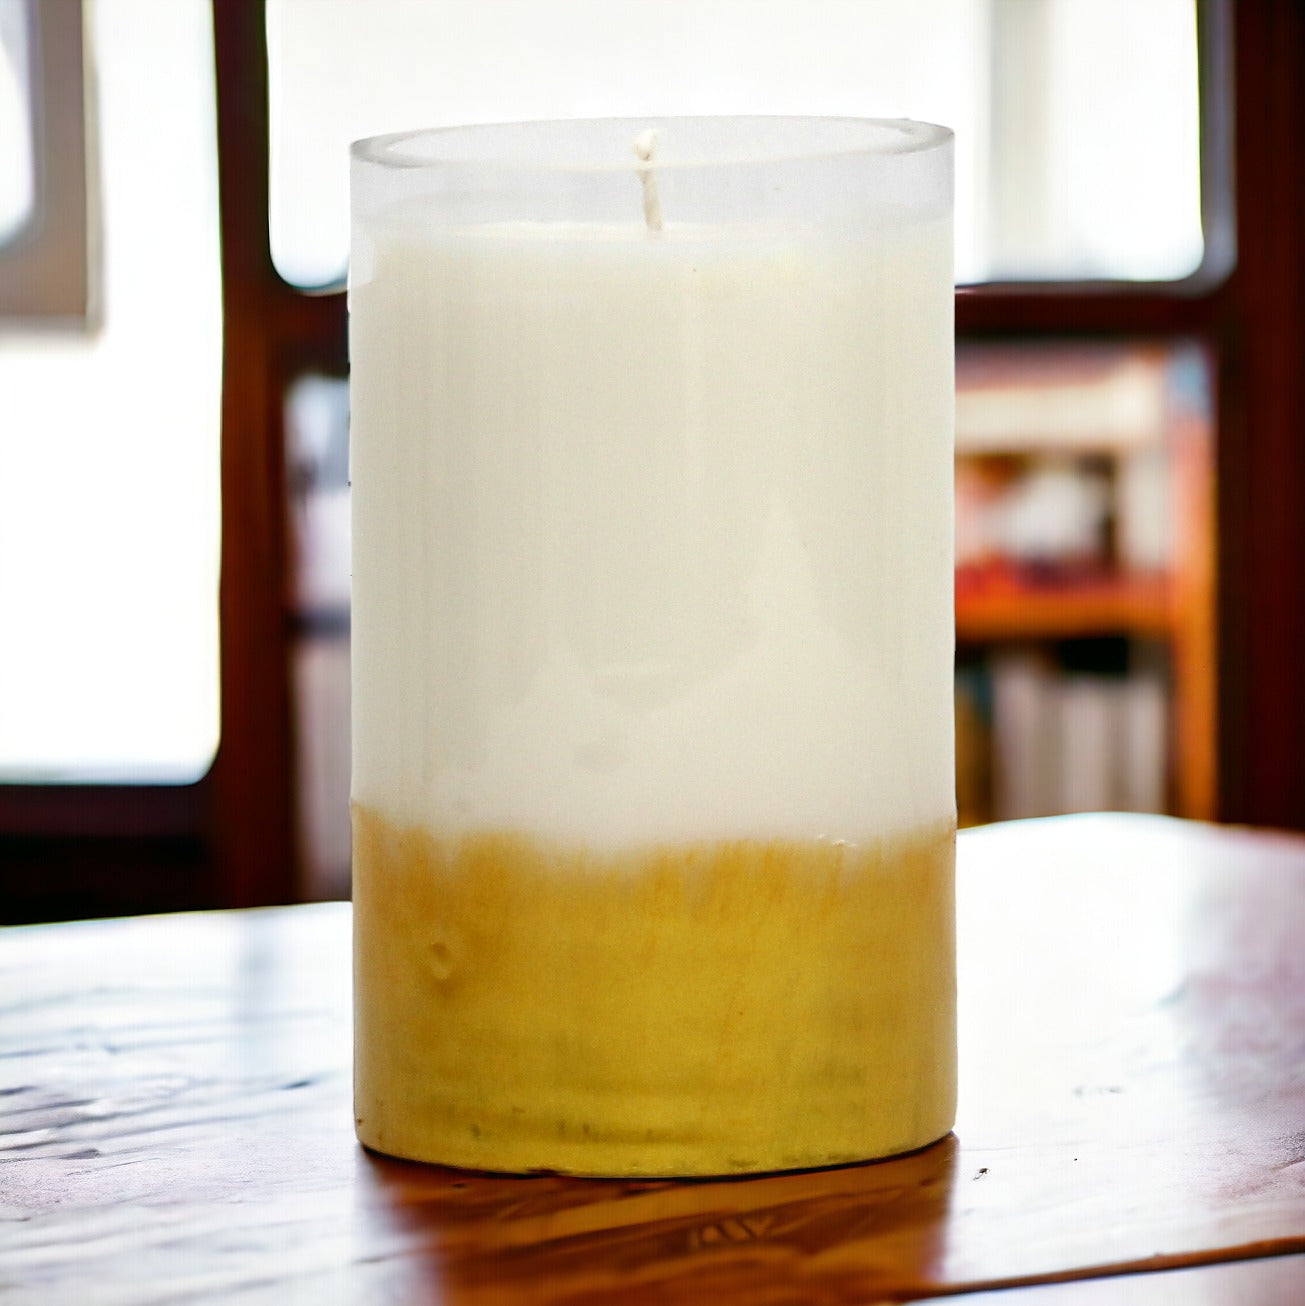 GILDED: Soy Wax Candle with hand painted gold accent. Medium Tall round thick glass container